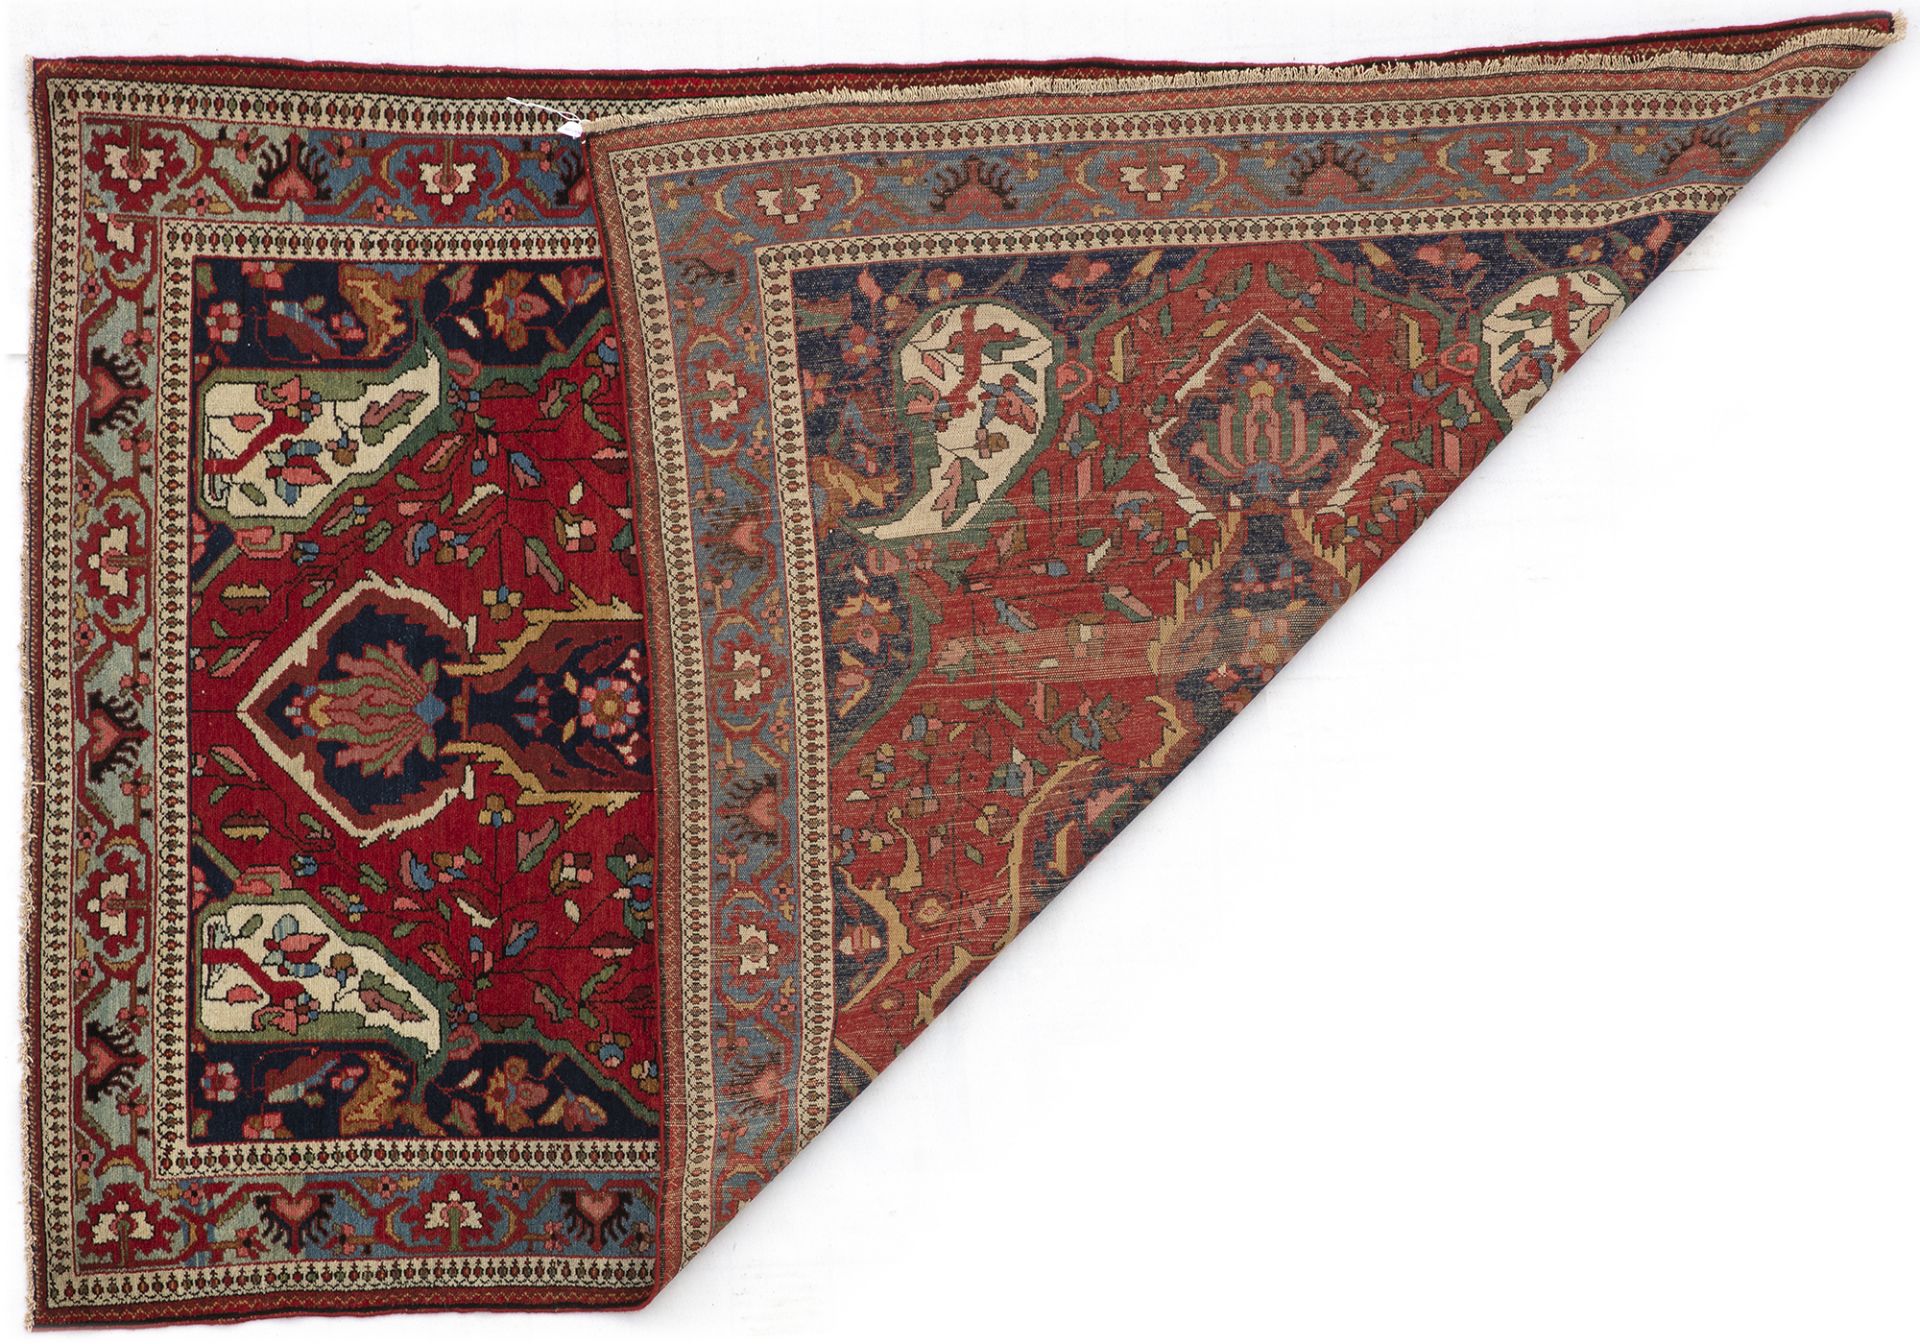 A FINE MISHAN MALAYER, LATE 19TH CENTURY - Image 4 of 4